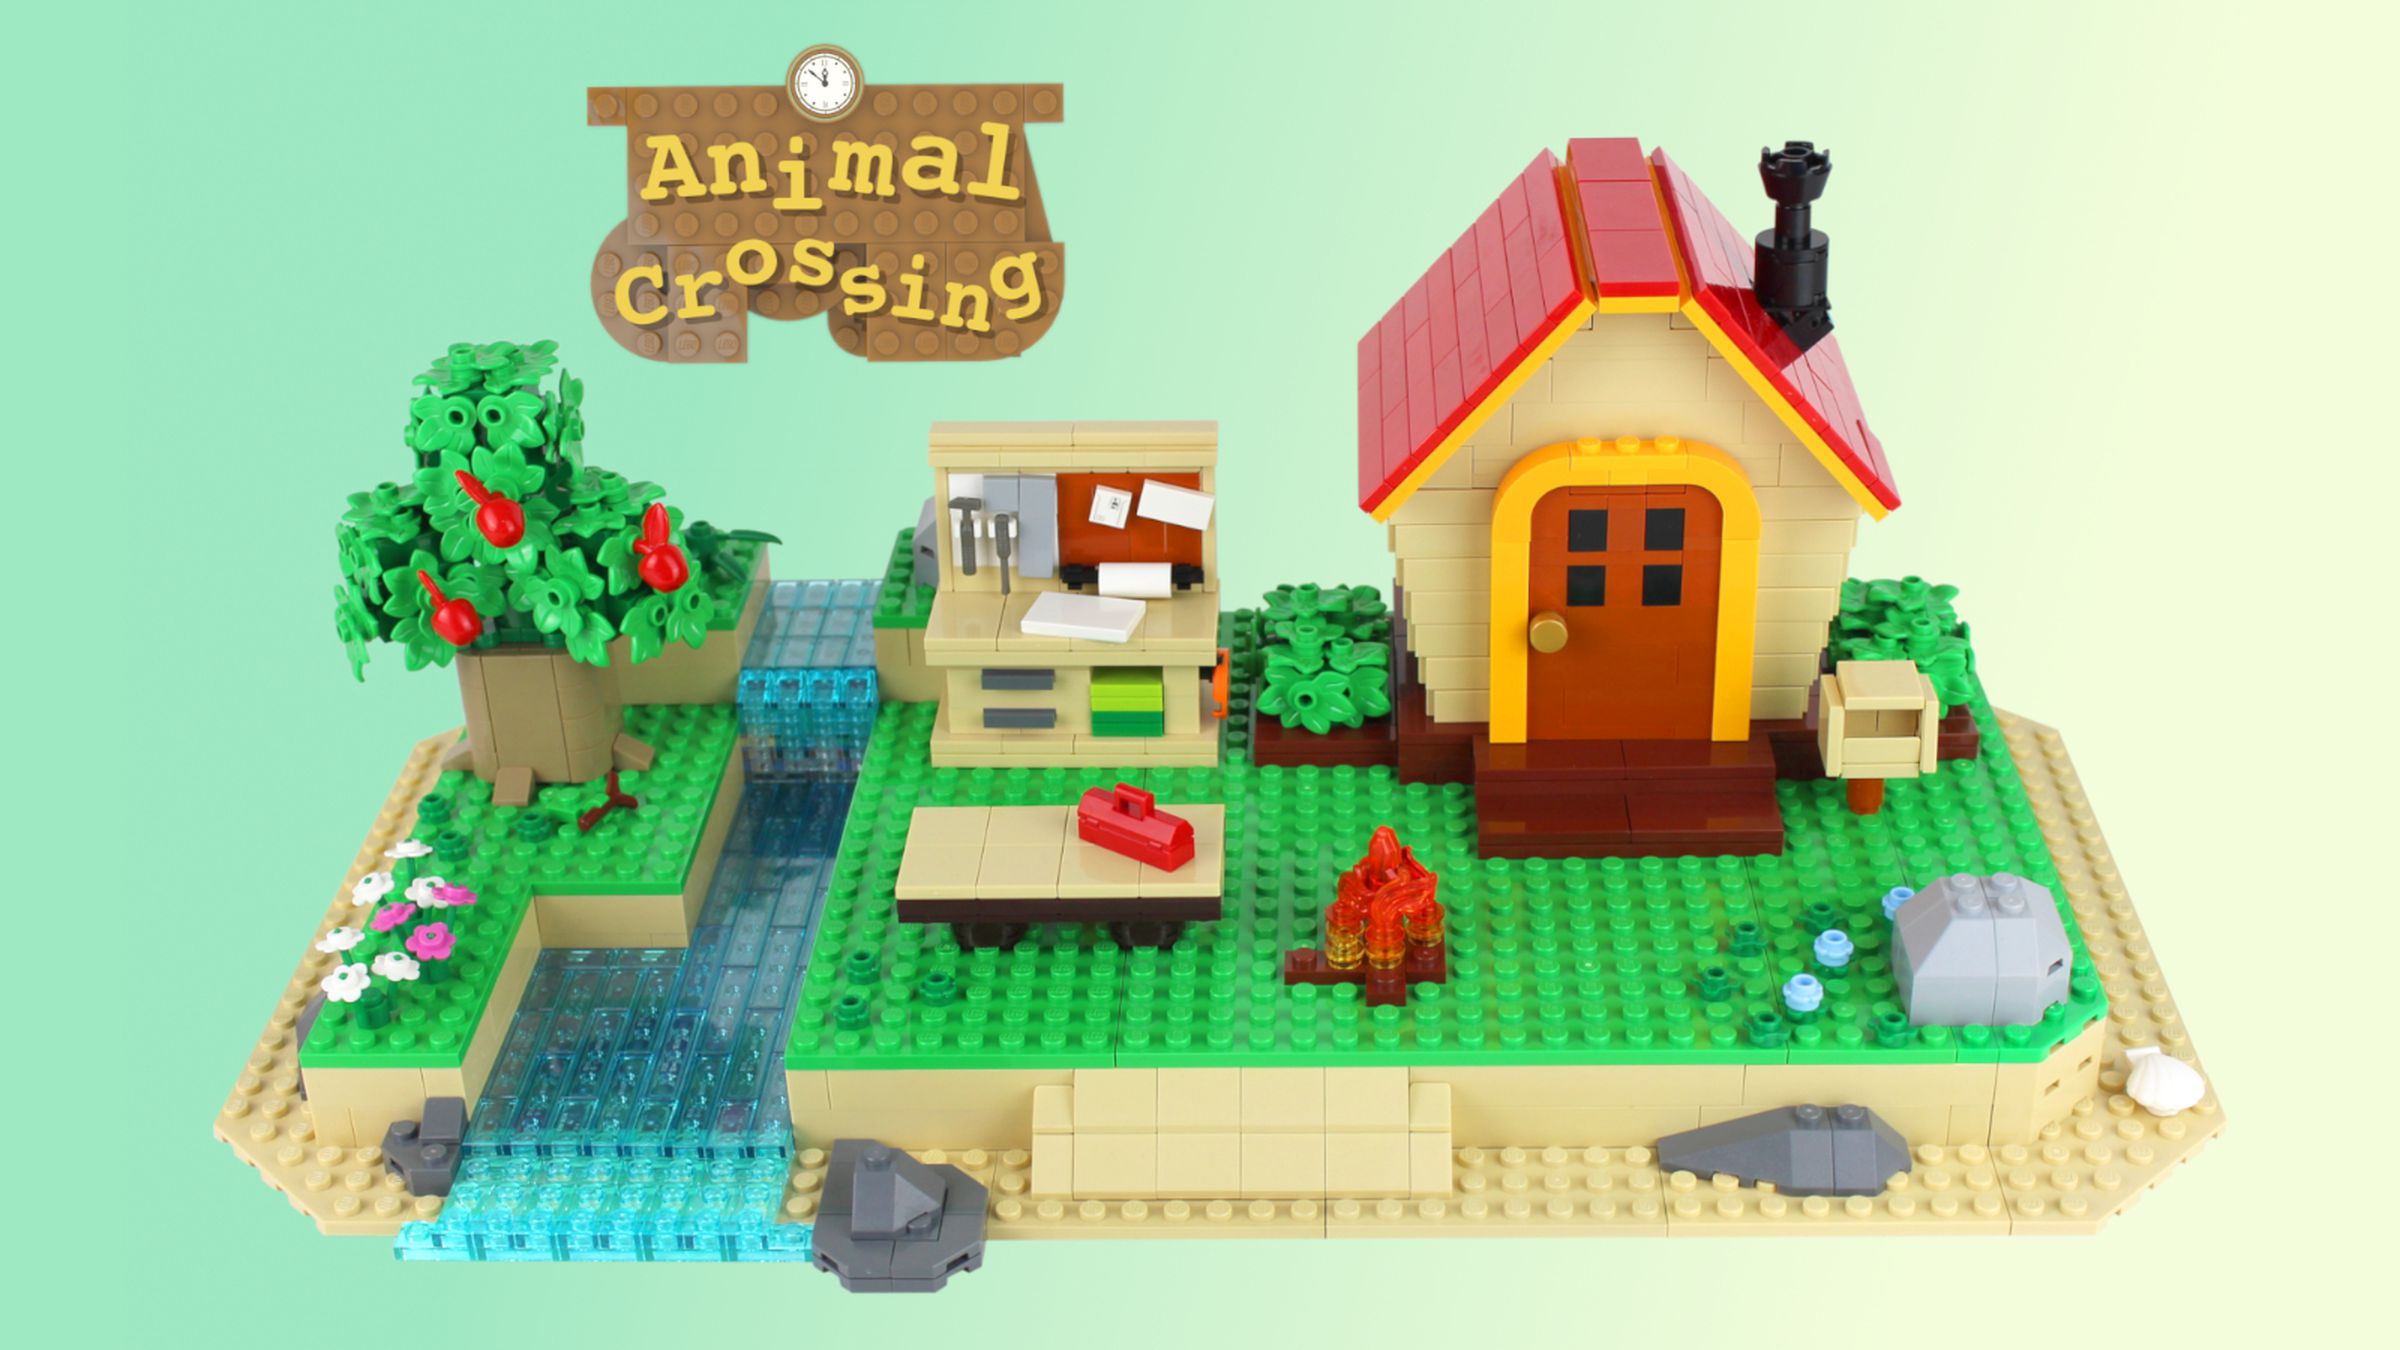 Image of an Animal Crossing lego set, including a house, beach, workbench, and river.